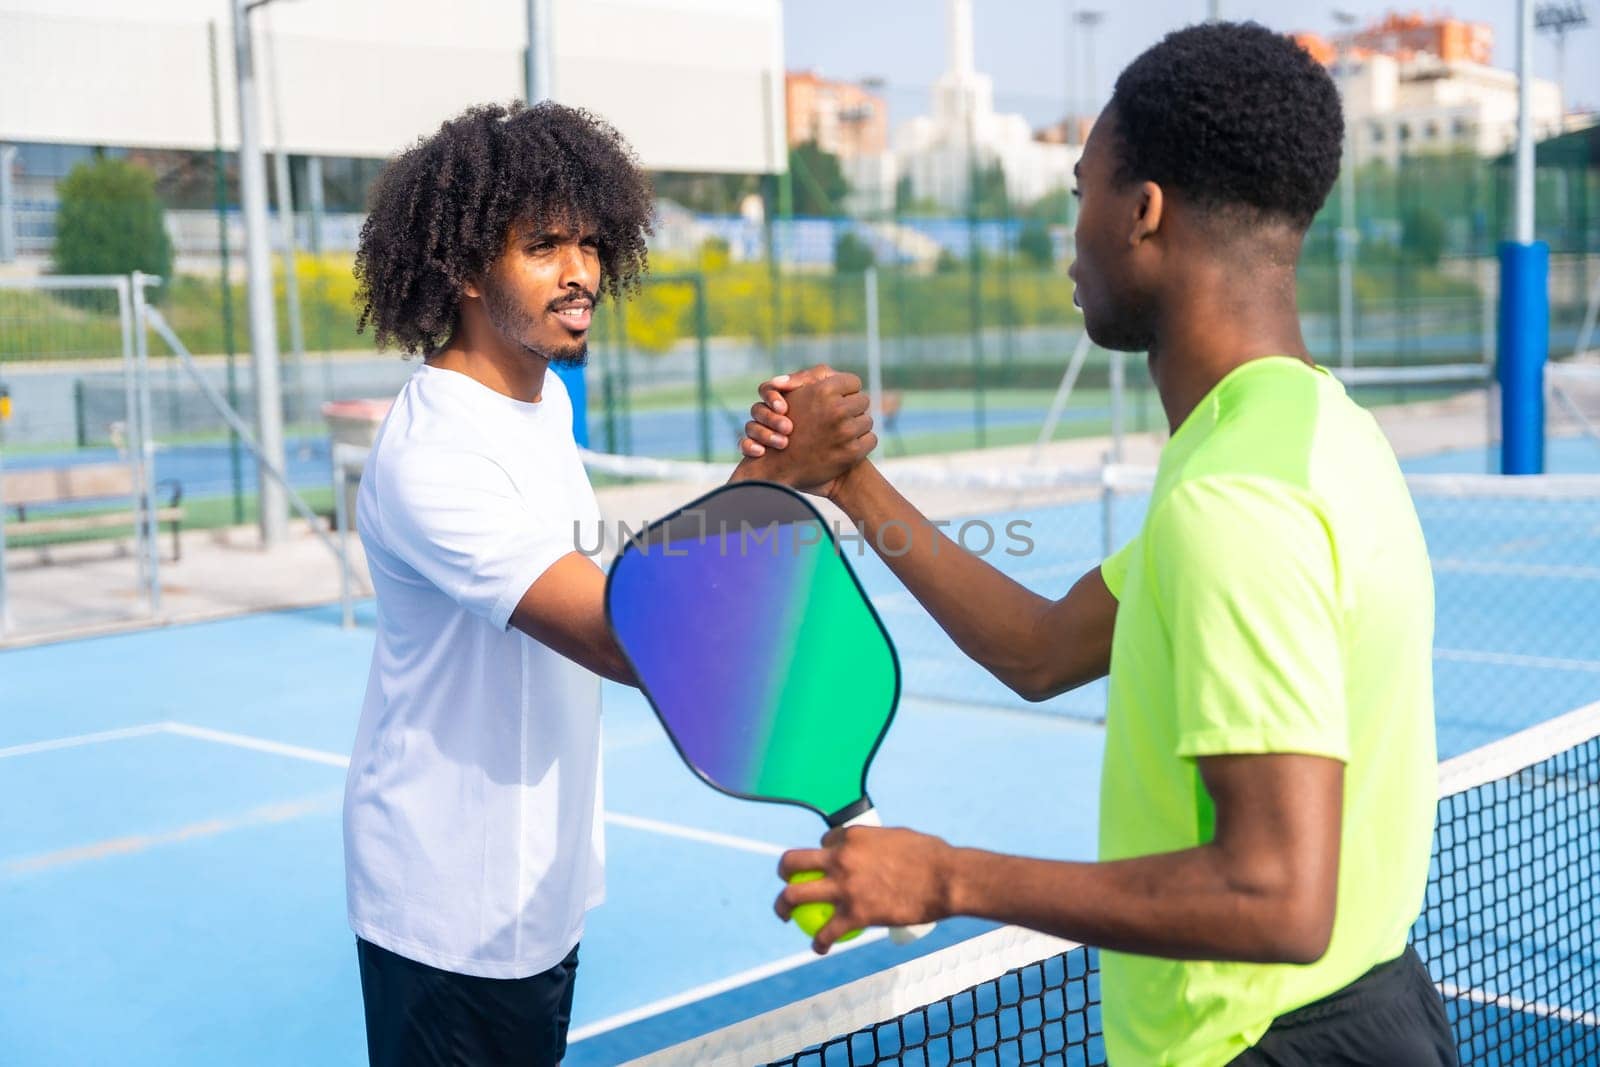 Men shaking hands before playing pickleball in an outdoor court by Huizi